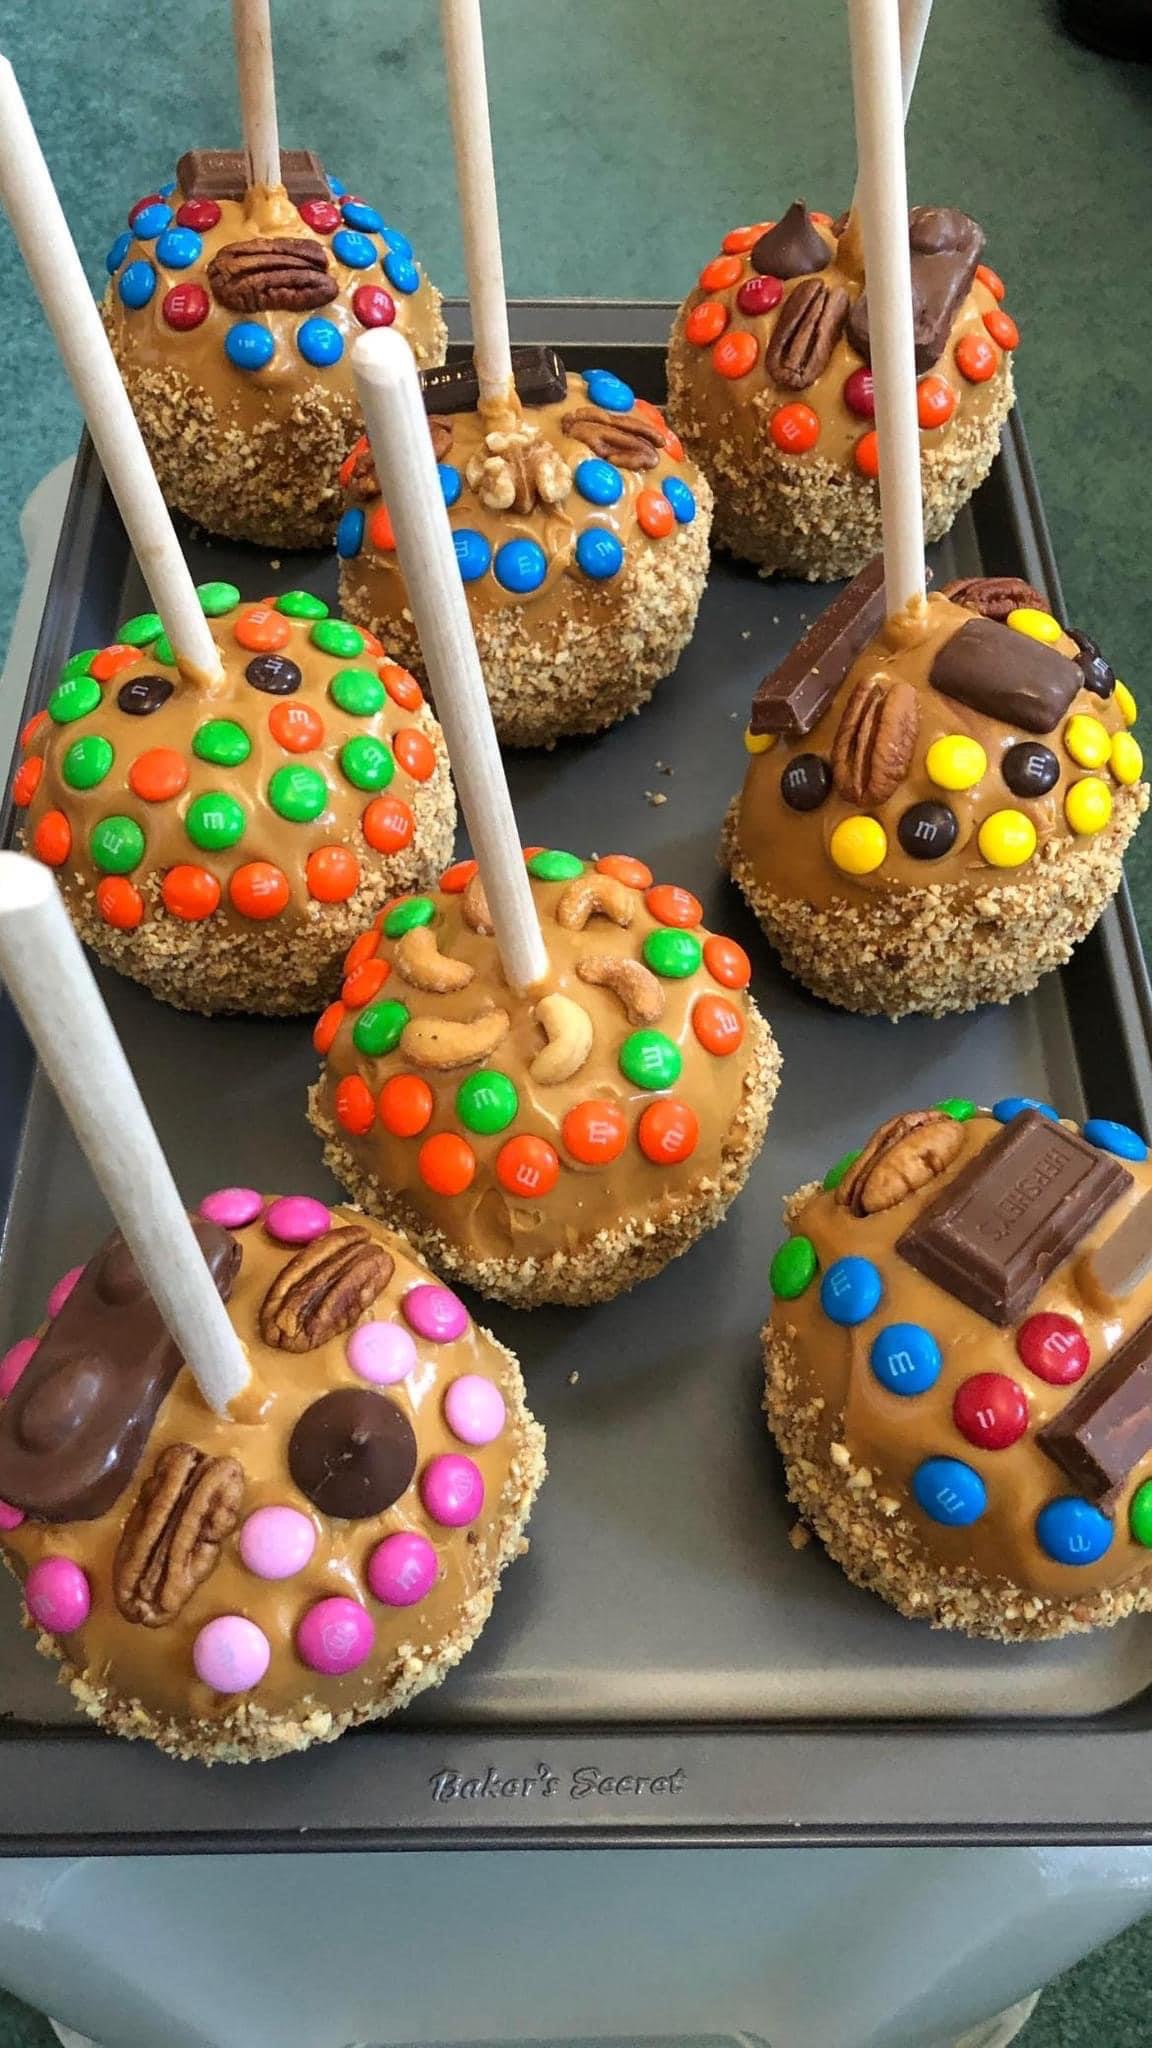 A tray of hand-dipped caramel apples.